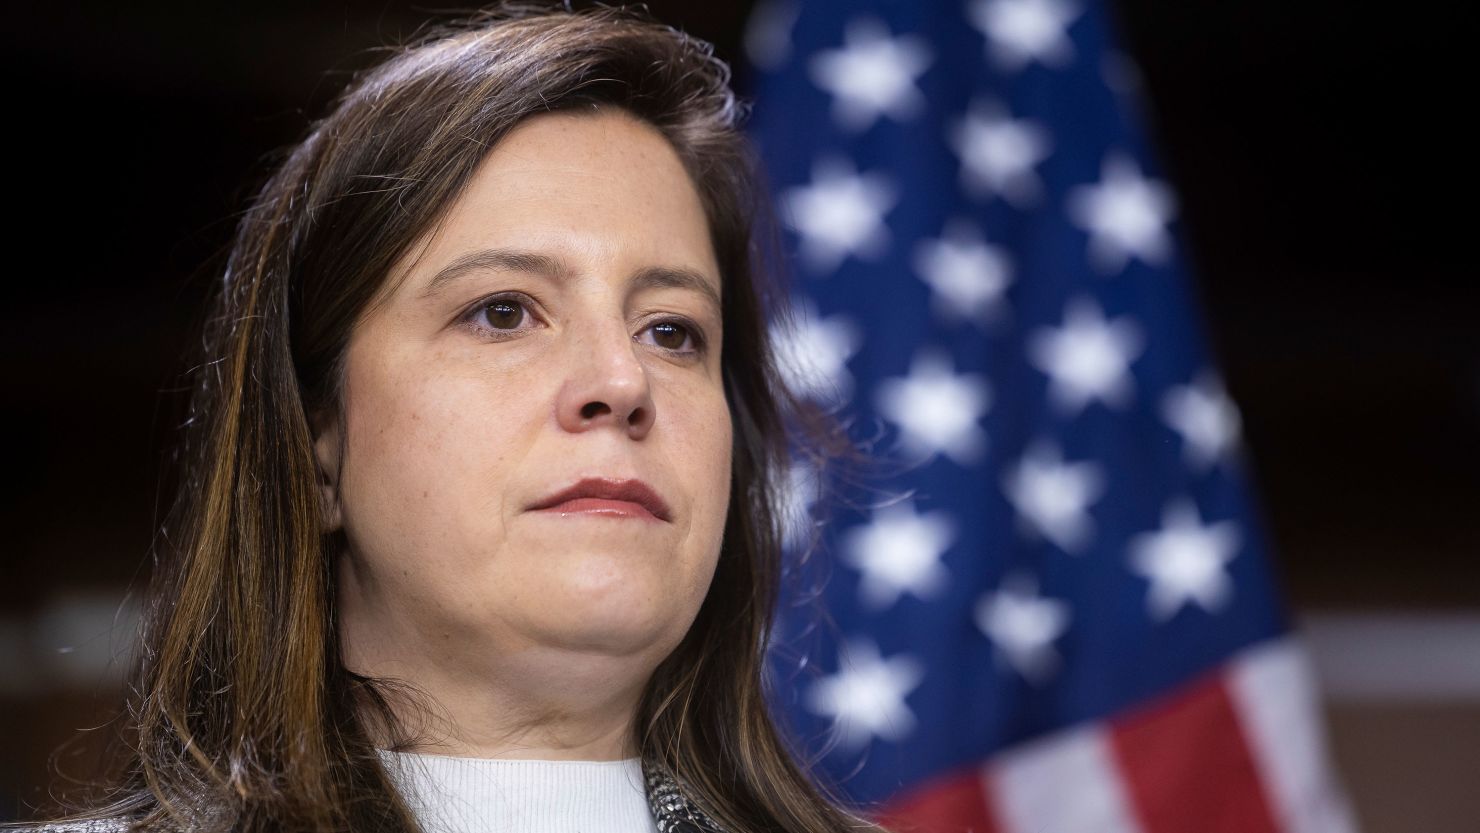 Elise Stefanik to campaign with Trump in New Hampshire, amid veepstakes ...